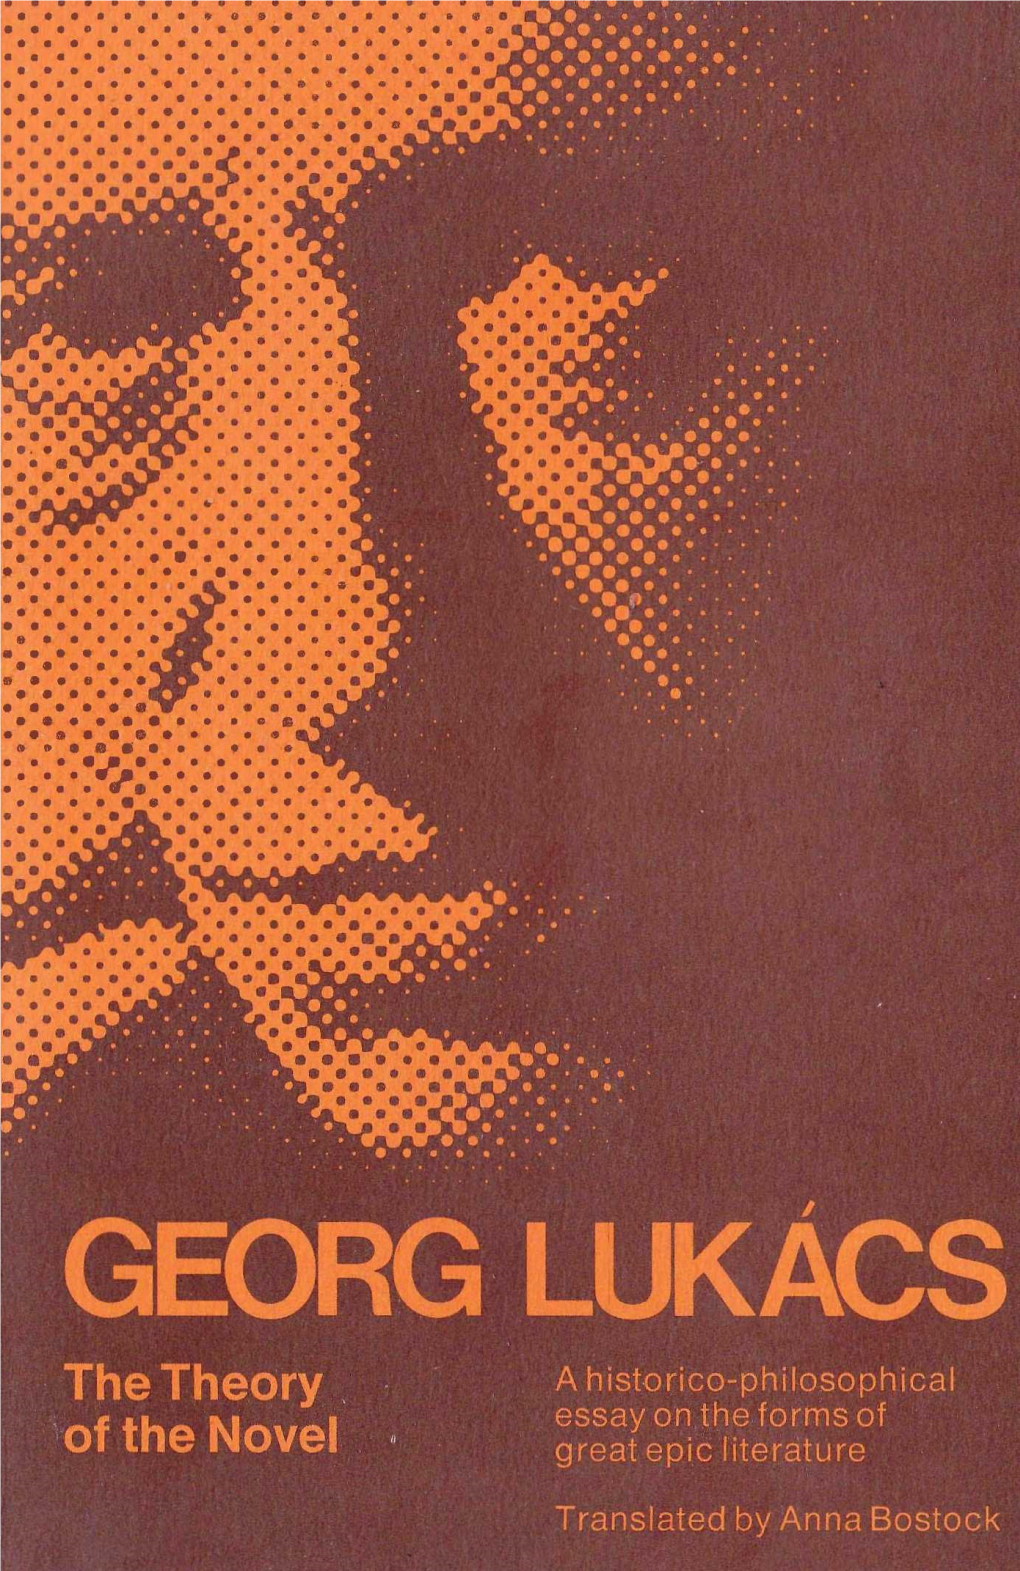 GEORG LUKACS the Theory a Historico-Philosophical Essay on the Forms of of the Novel Great Epic Literature